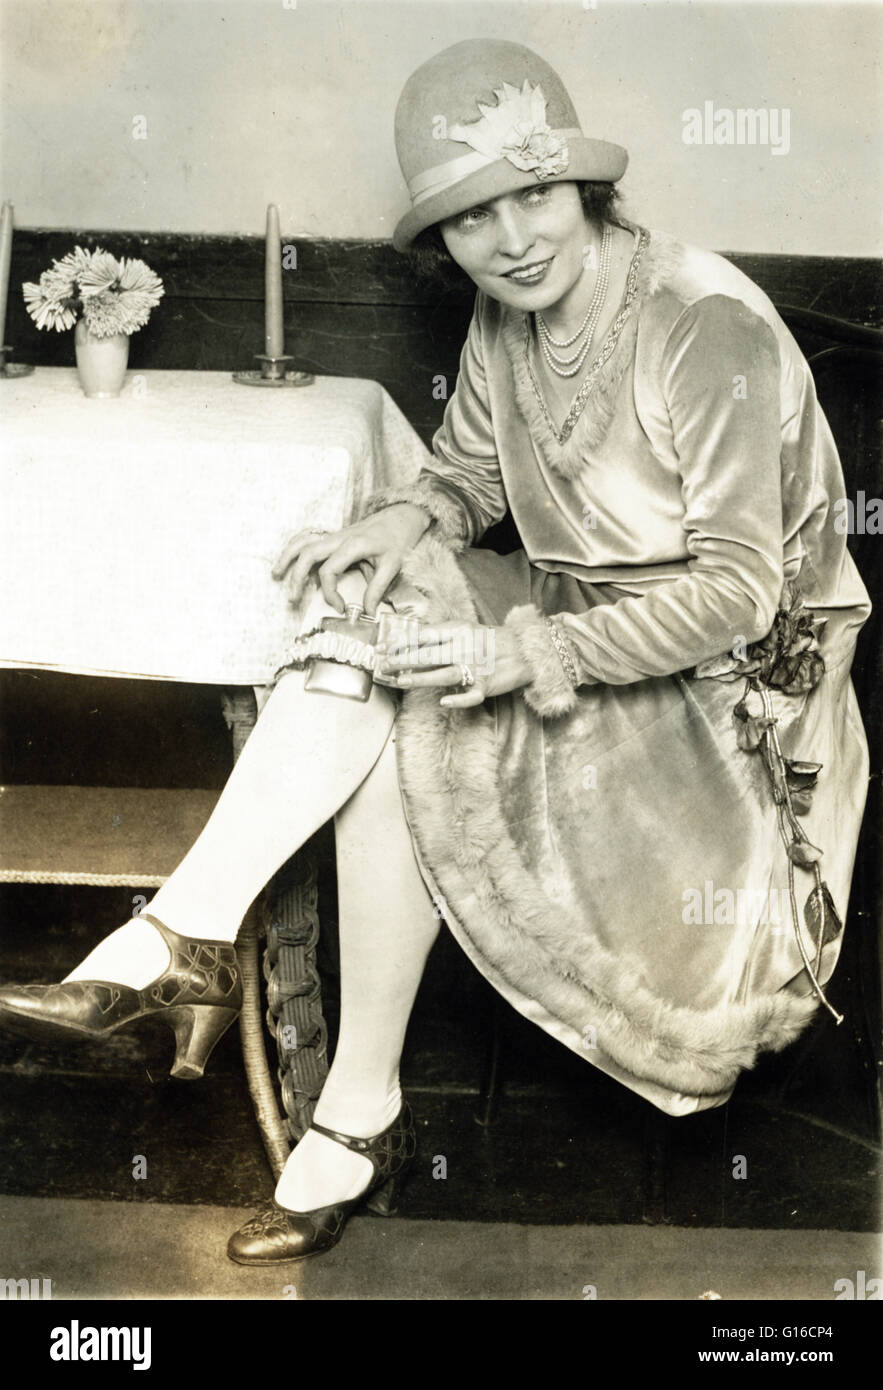 Woman with hidden with flask in garter on leg. Flappers were a 'new breed' of young Western women in the 1920s who wore short skirts, bobbed their hair, listened to jazz, and flaunted their disdain for what was then considered acceptable behavior. Flapper Stock Photo